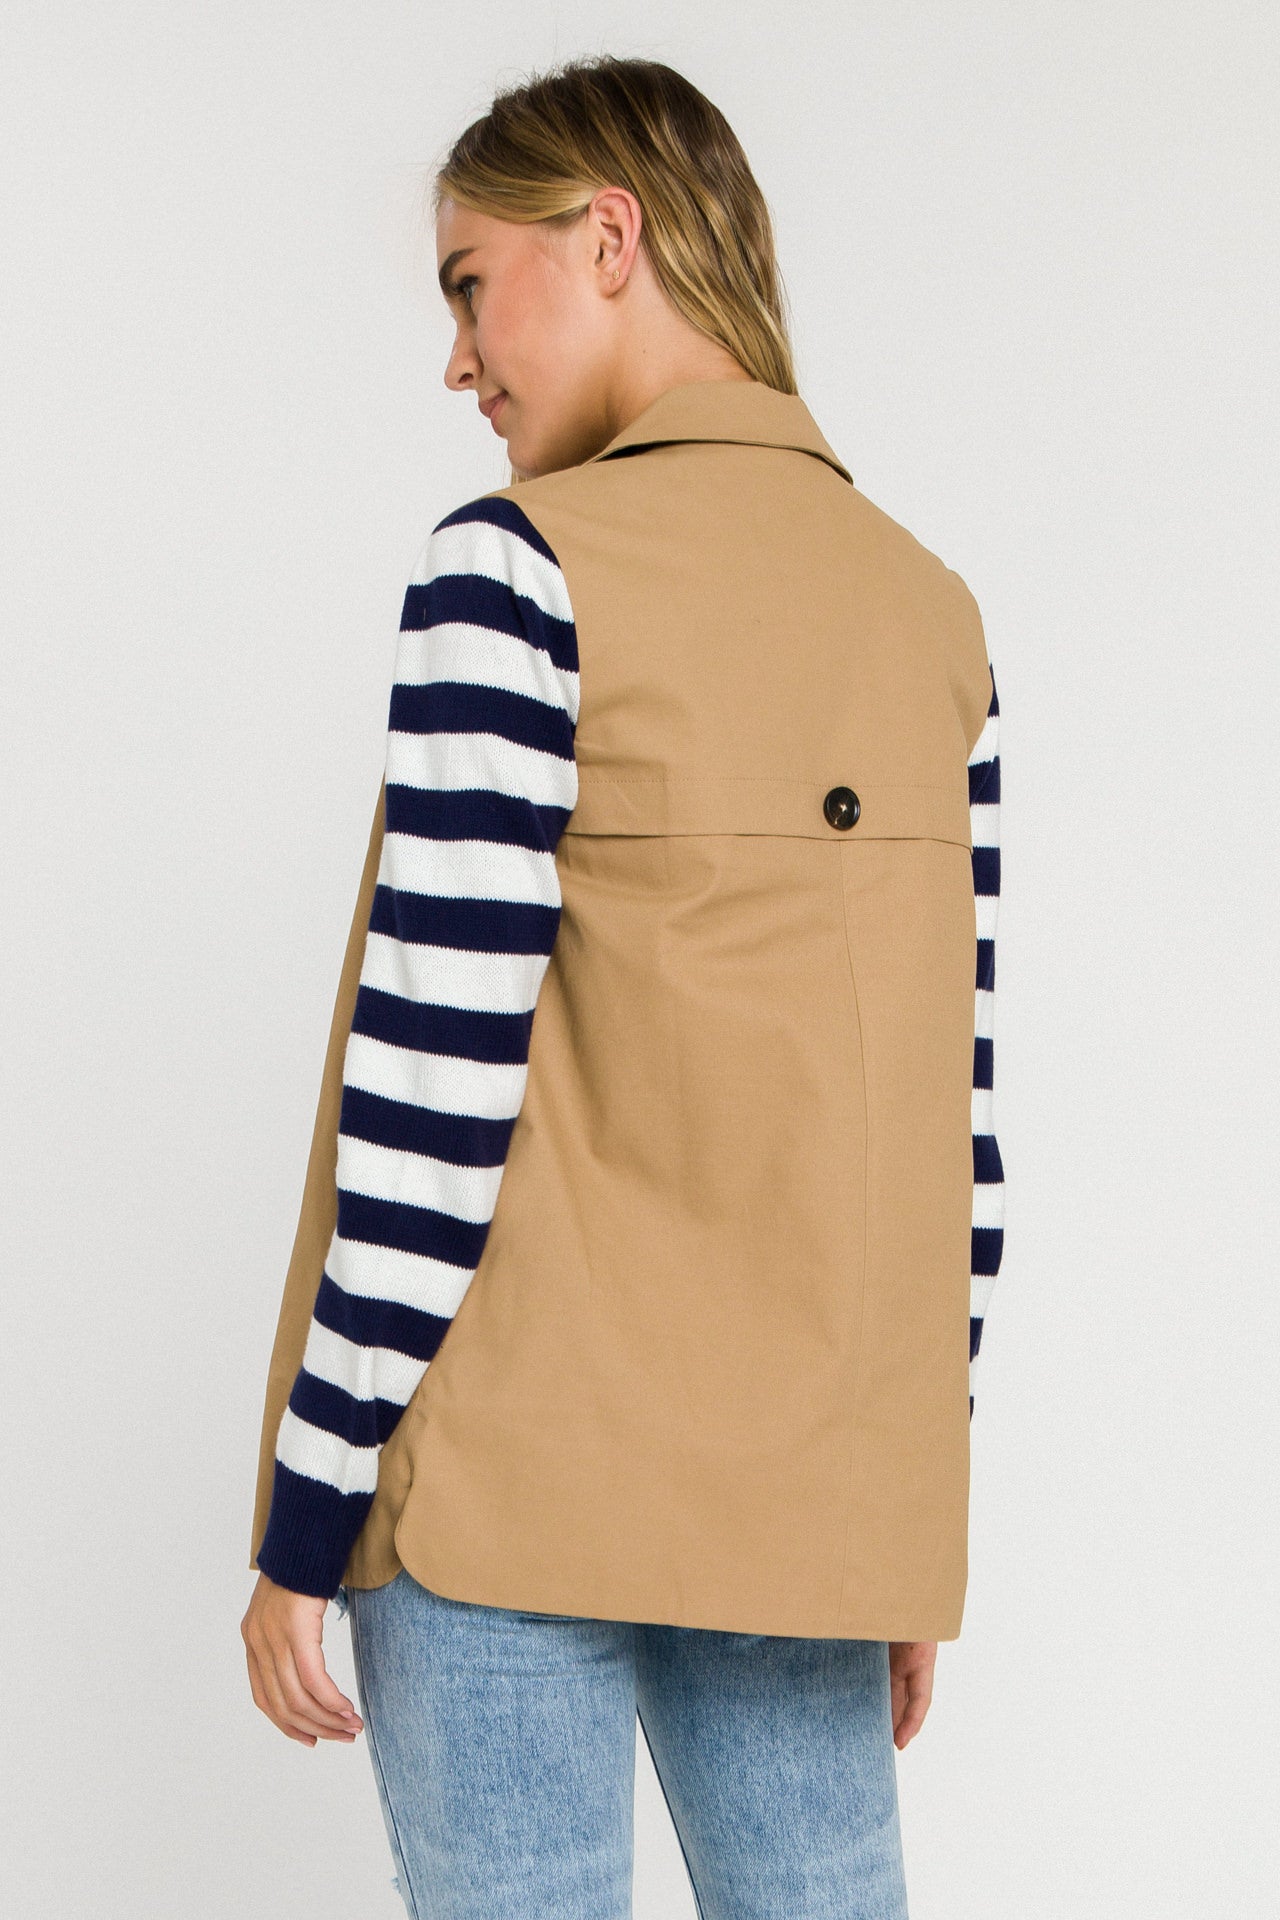 ENGLISH FACTORY - Contrast Sleeve Jacket - JACKETS available at Objectrare